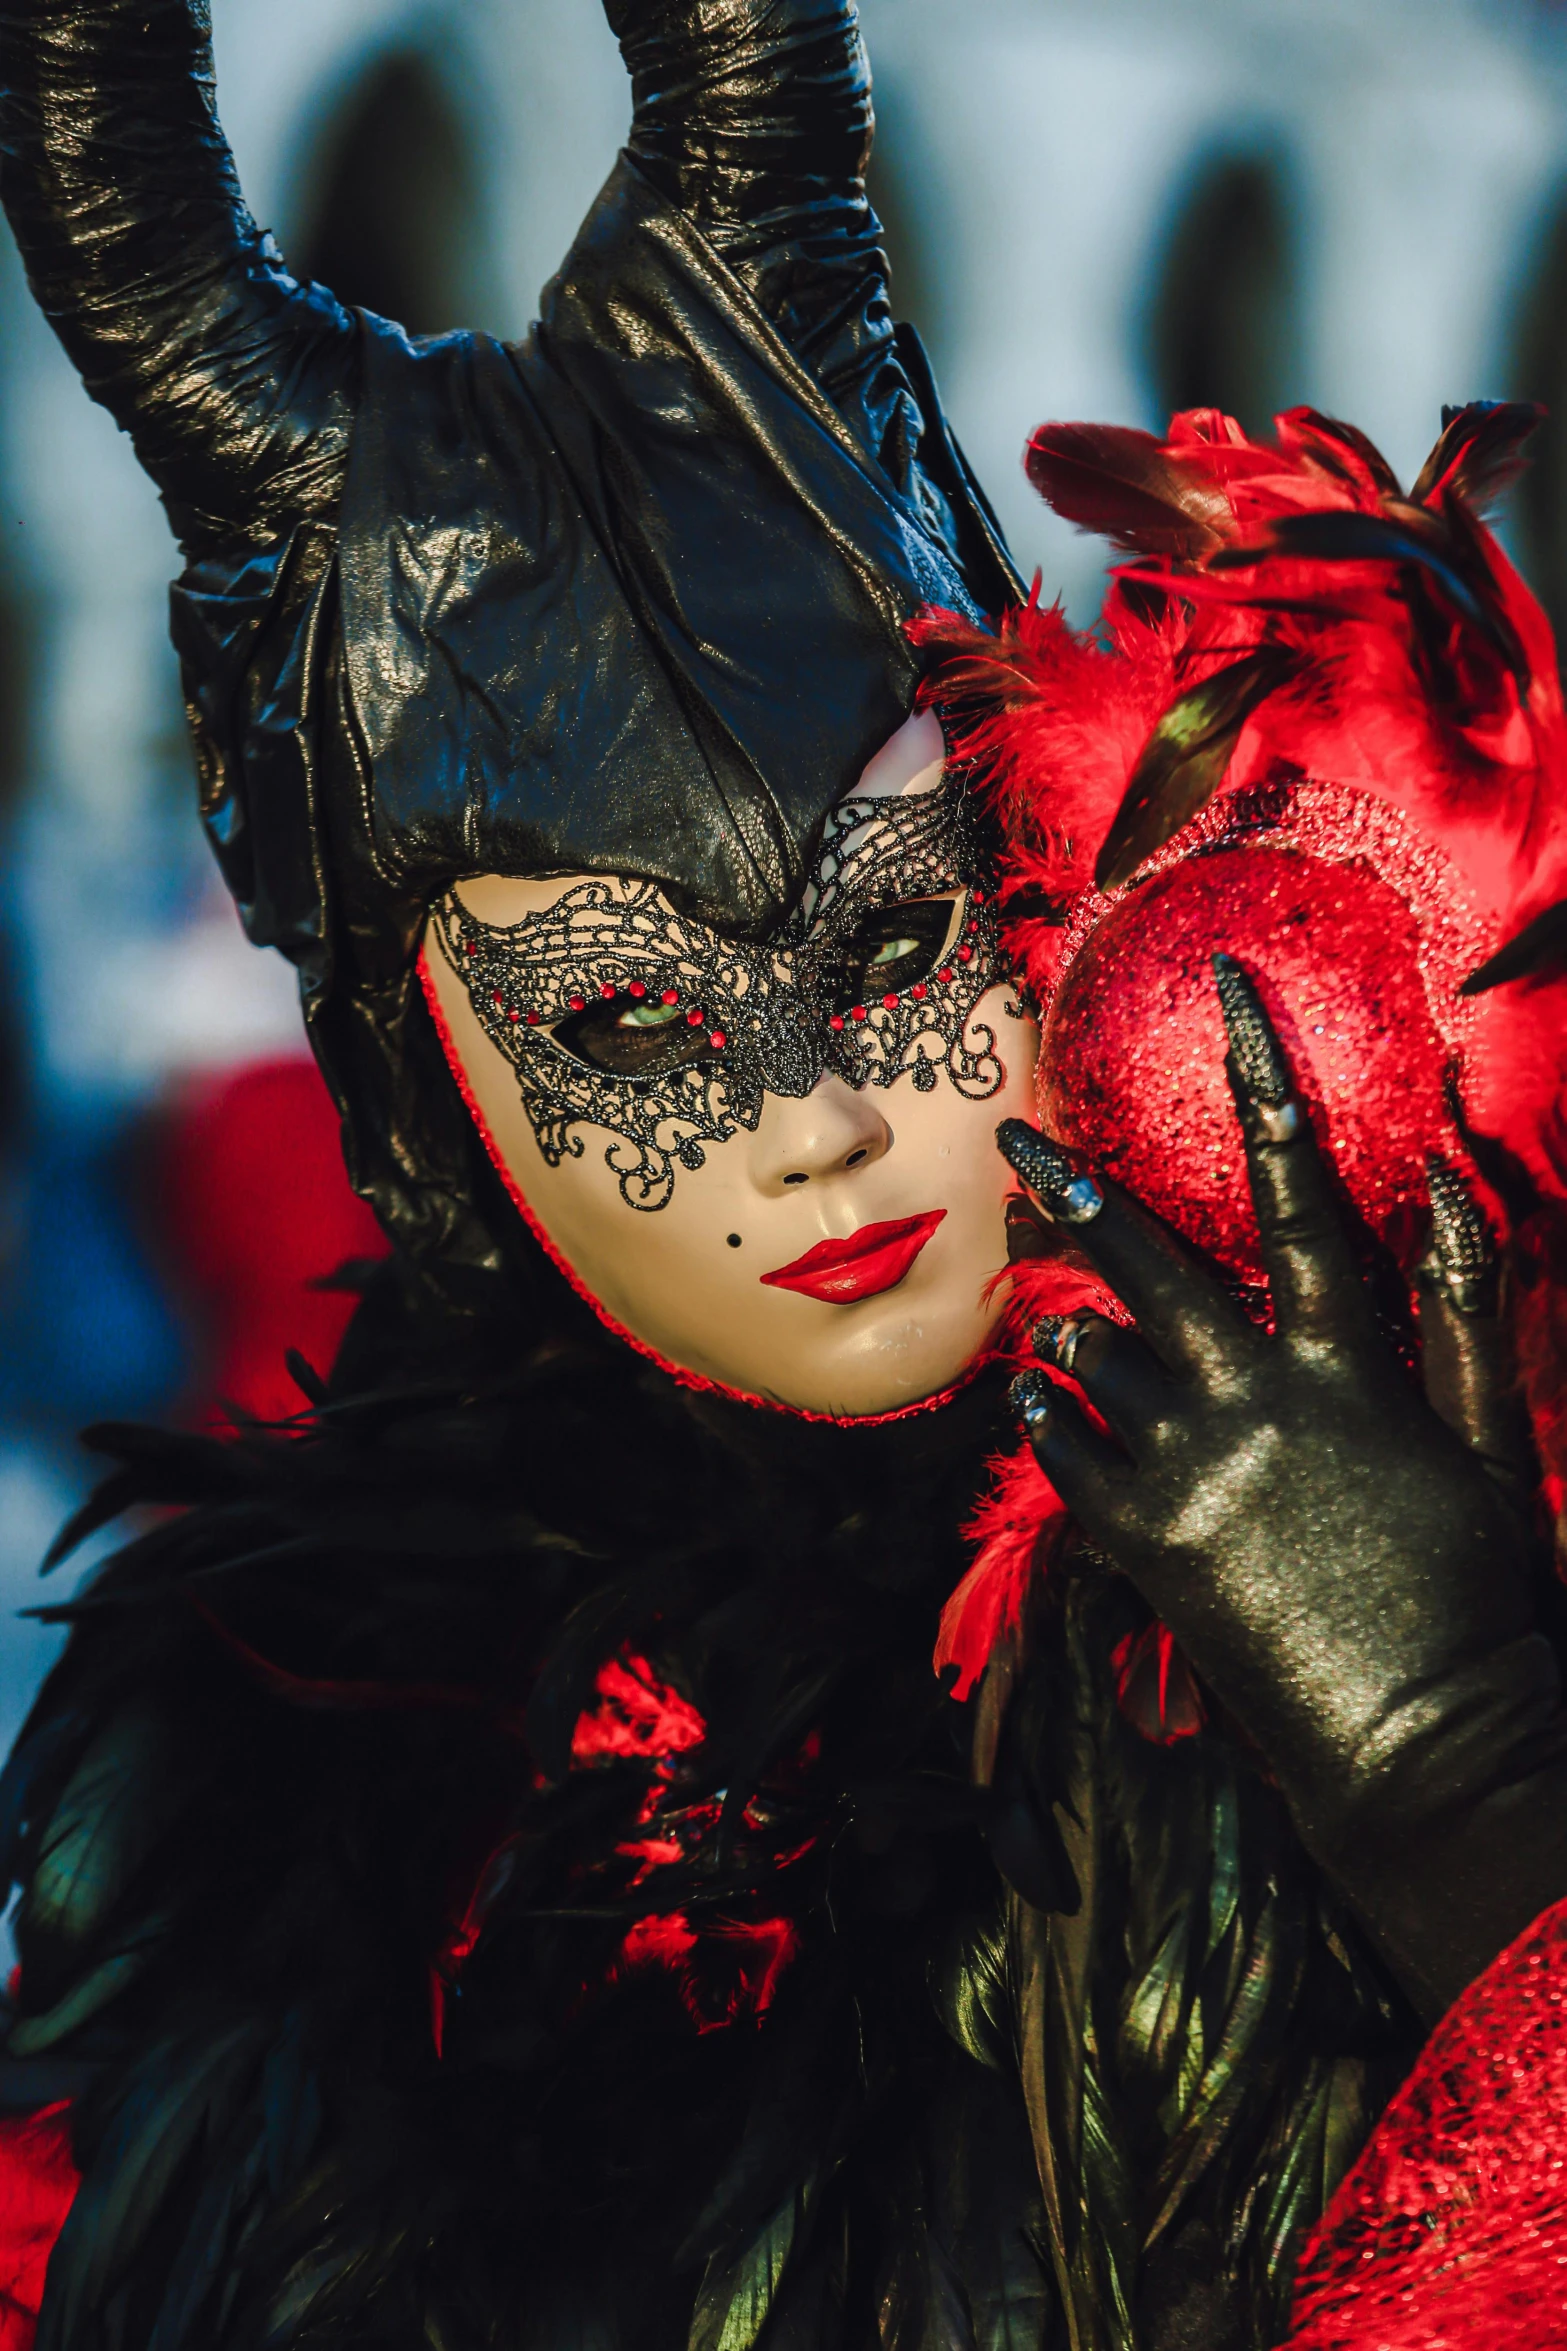 a beautiful red and black costumed woman with horns